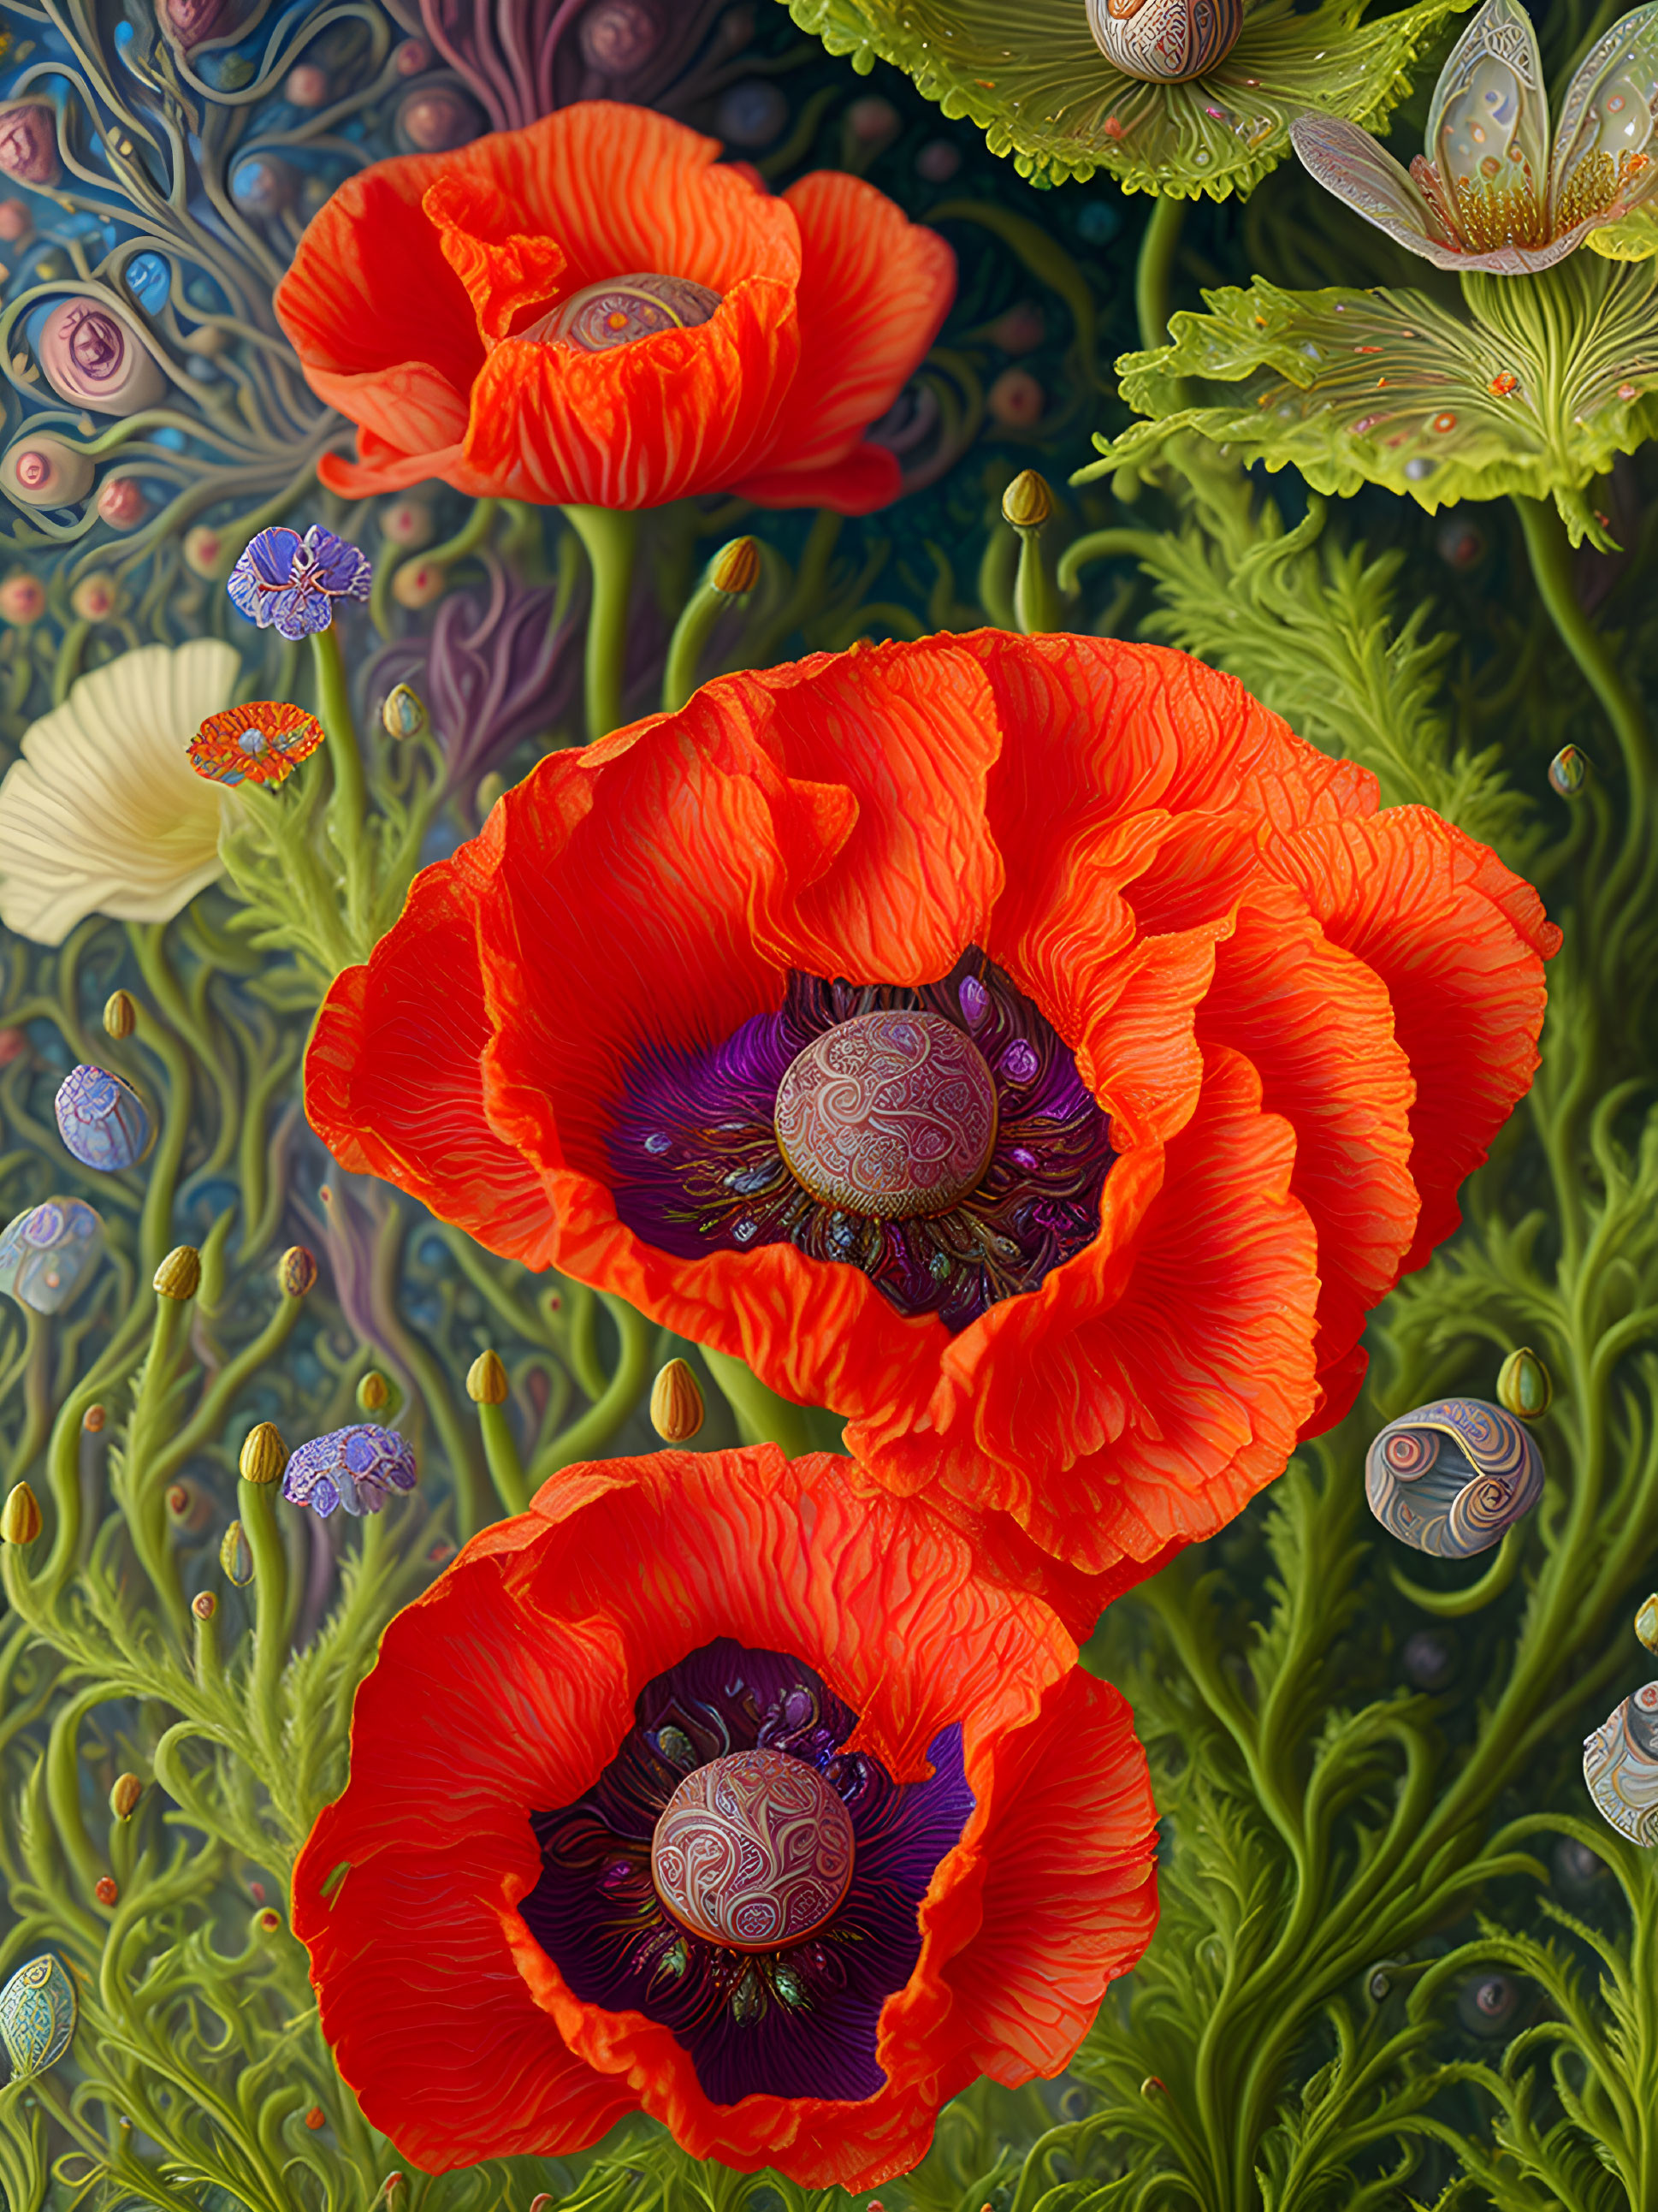 Detailed red poppies against whimsical floral backdrop